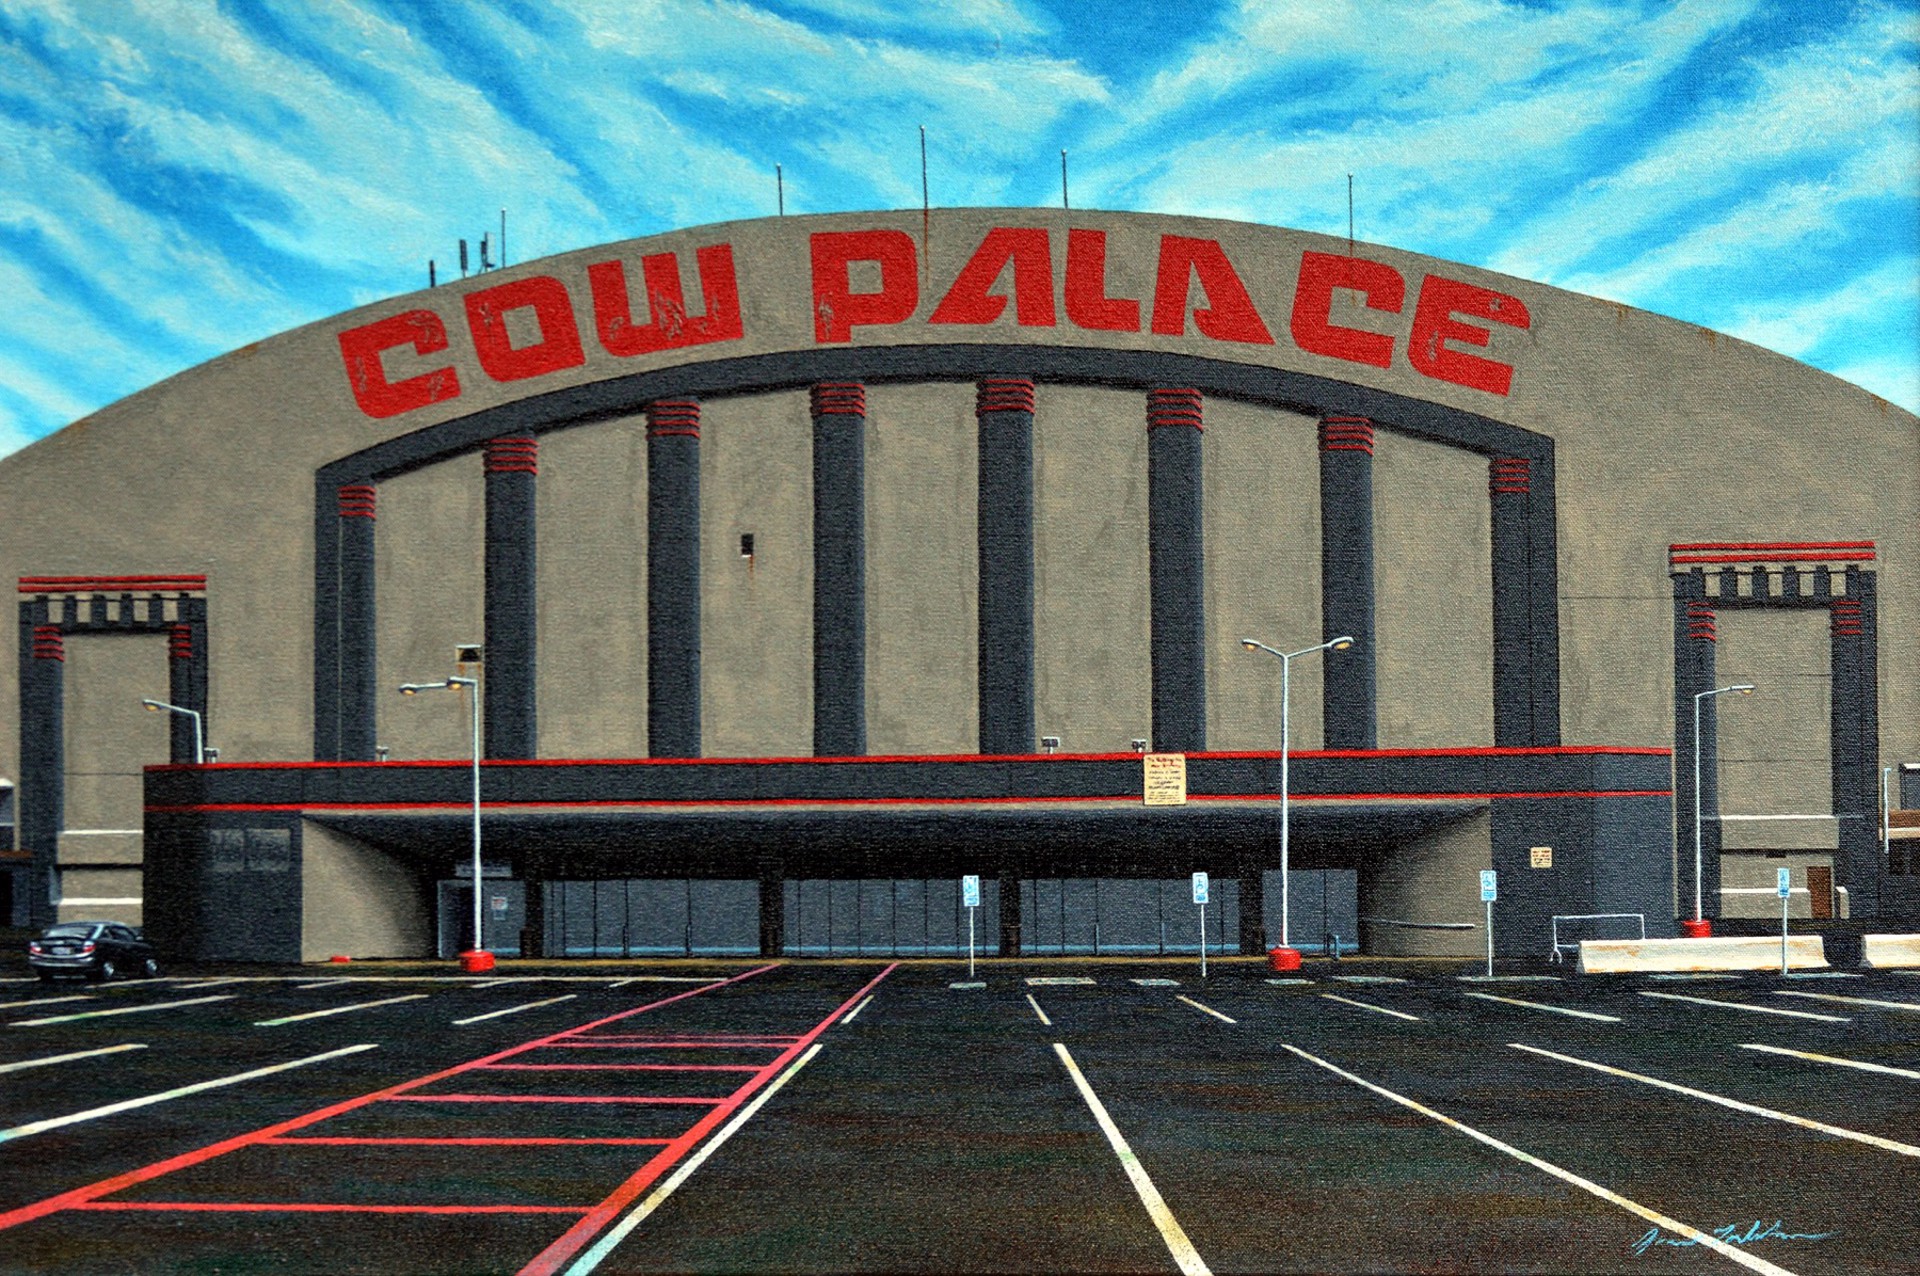 Cow Palace by James Torlakson